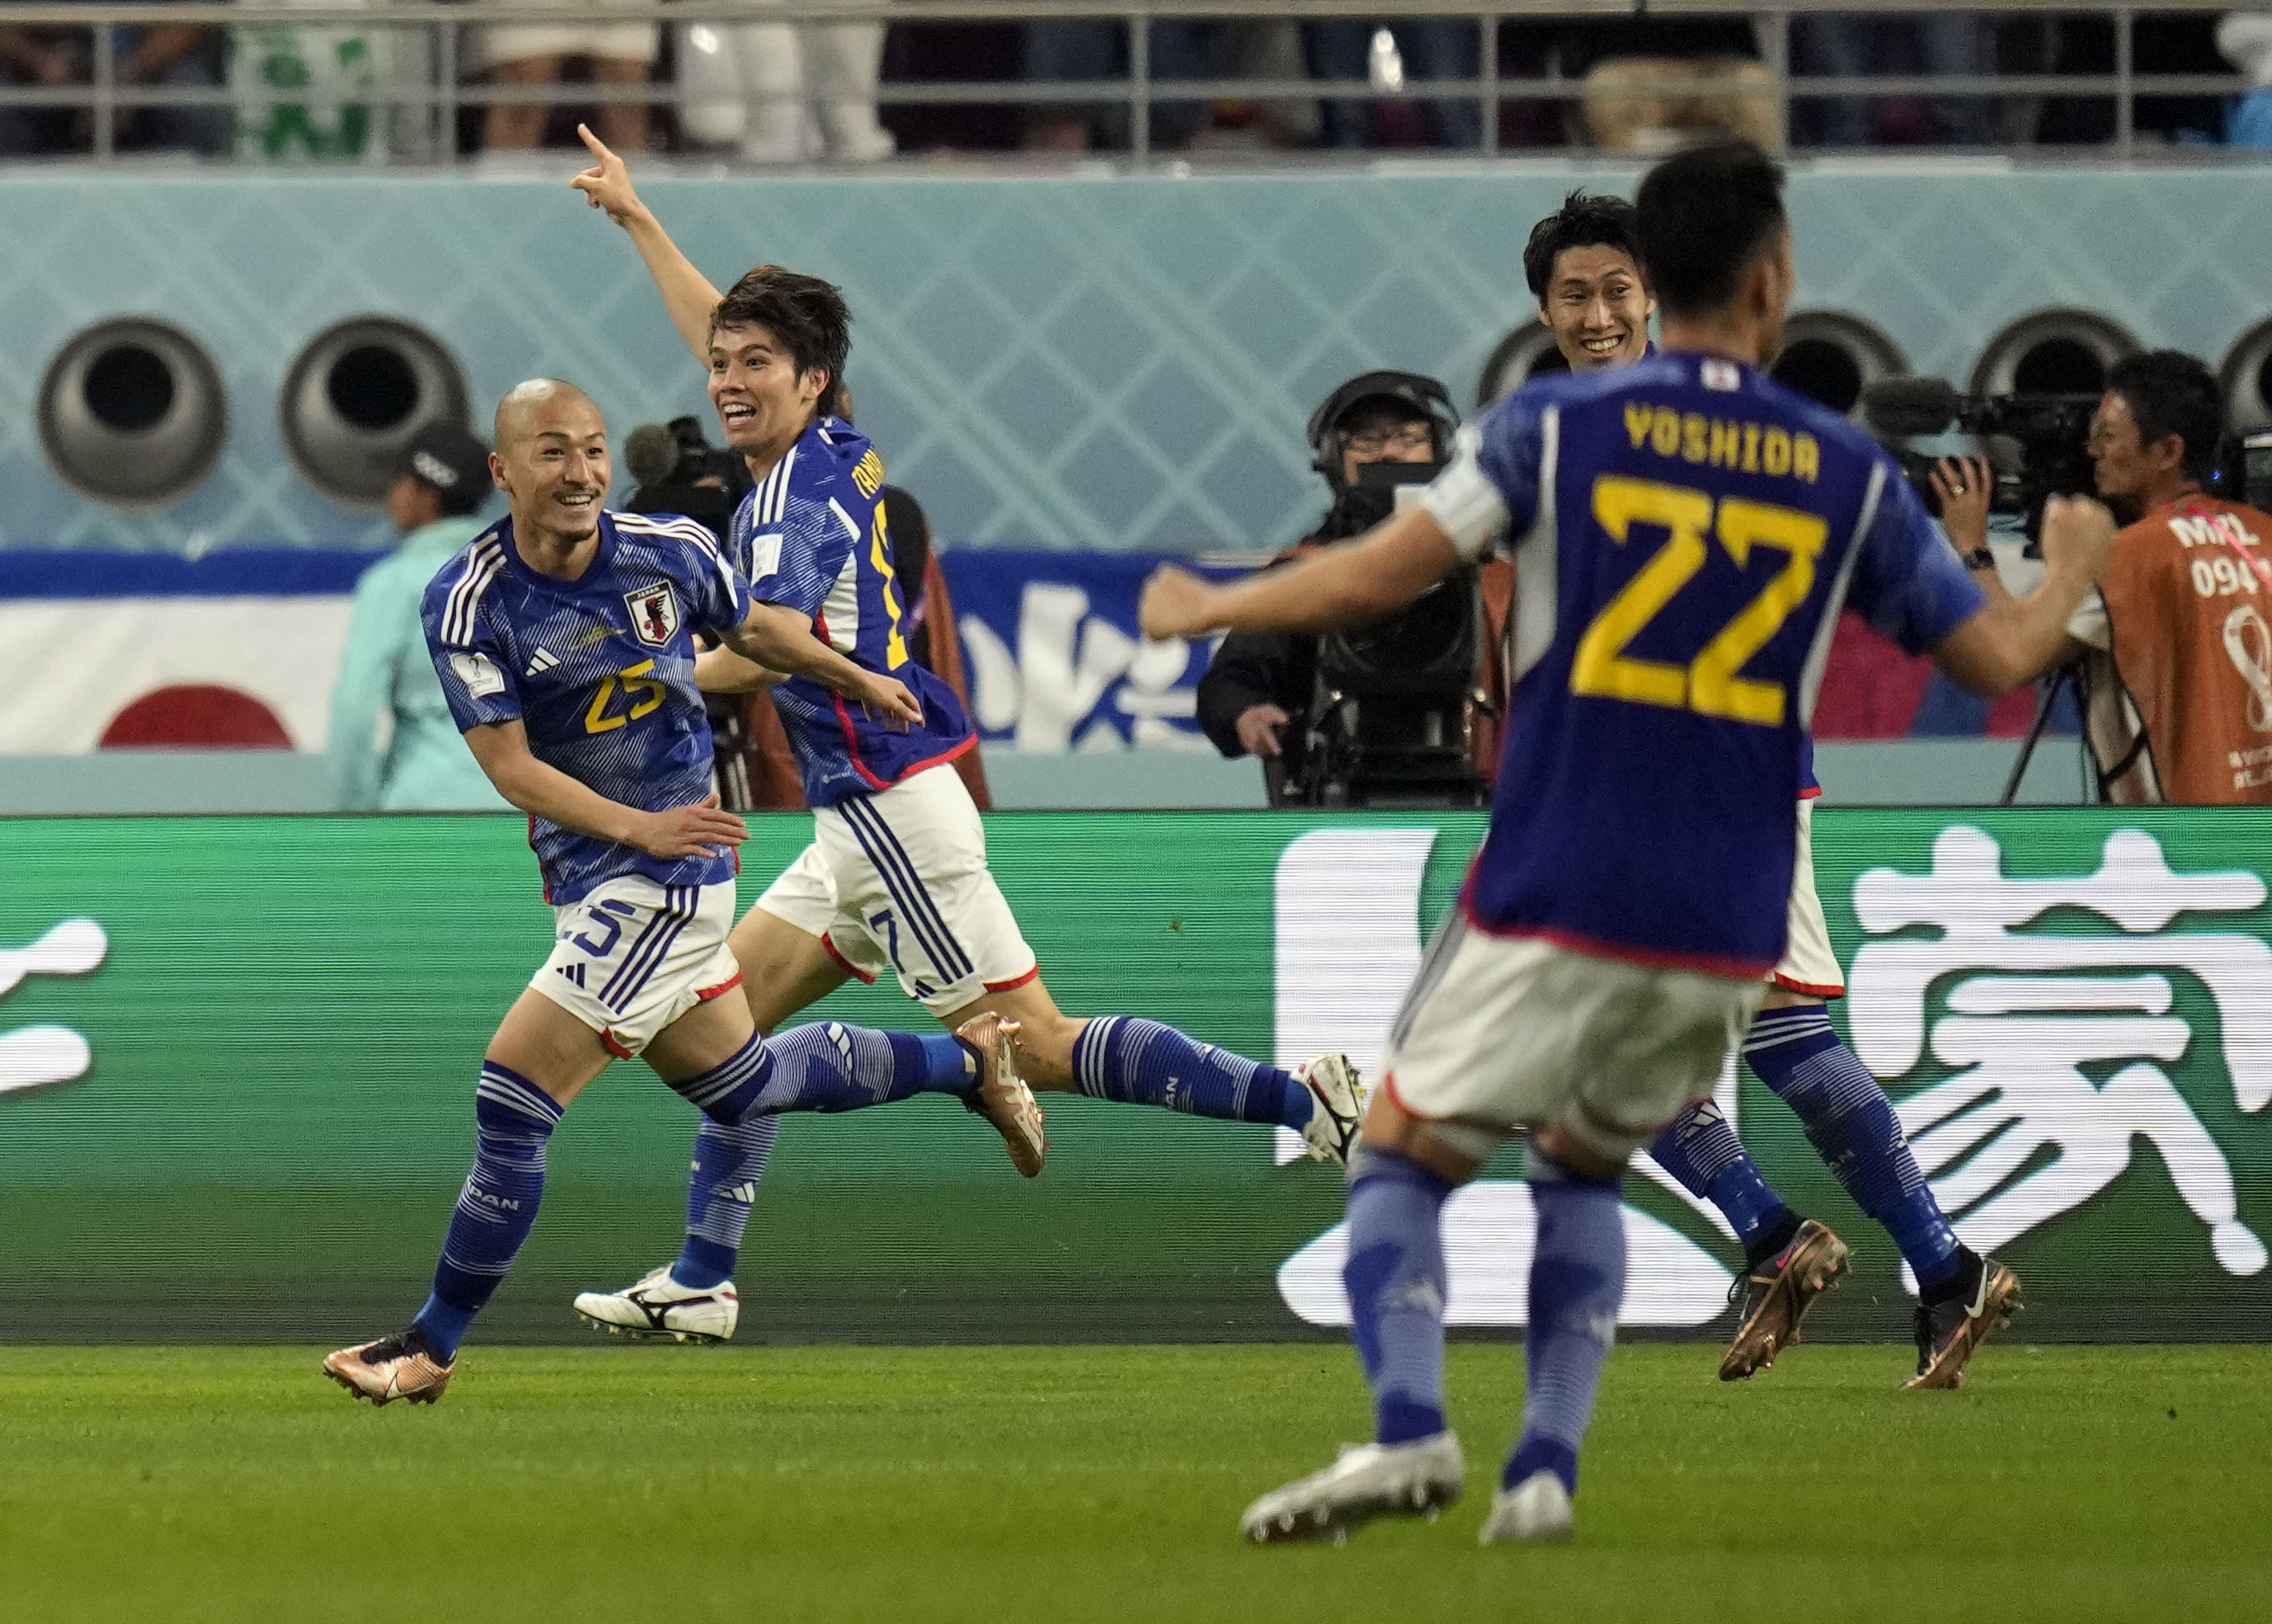 Japan's Ao Tanaka celebrates after scoring his team's second goal against Spain.